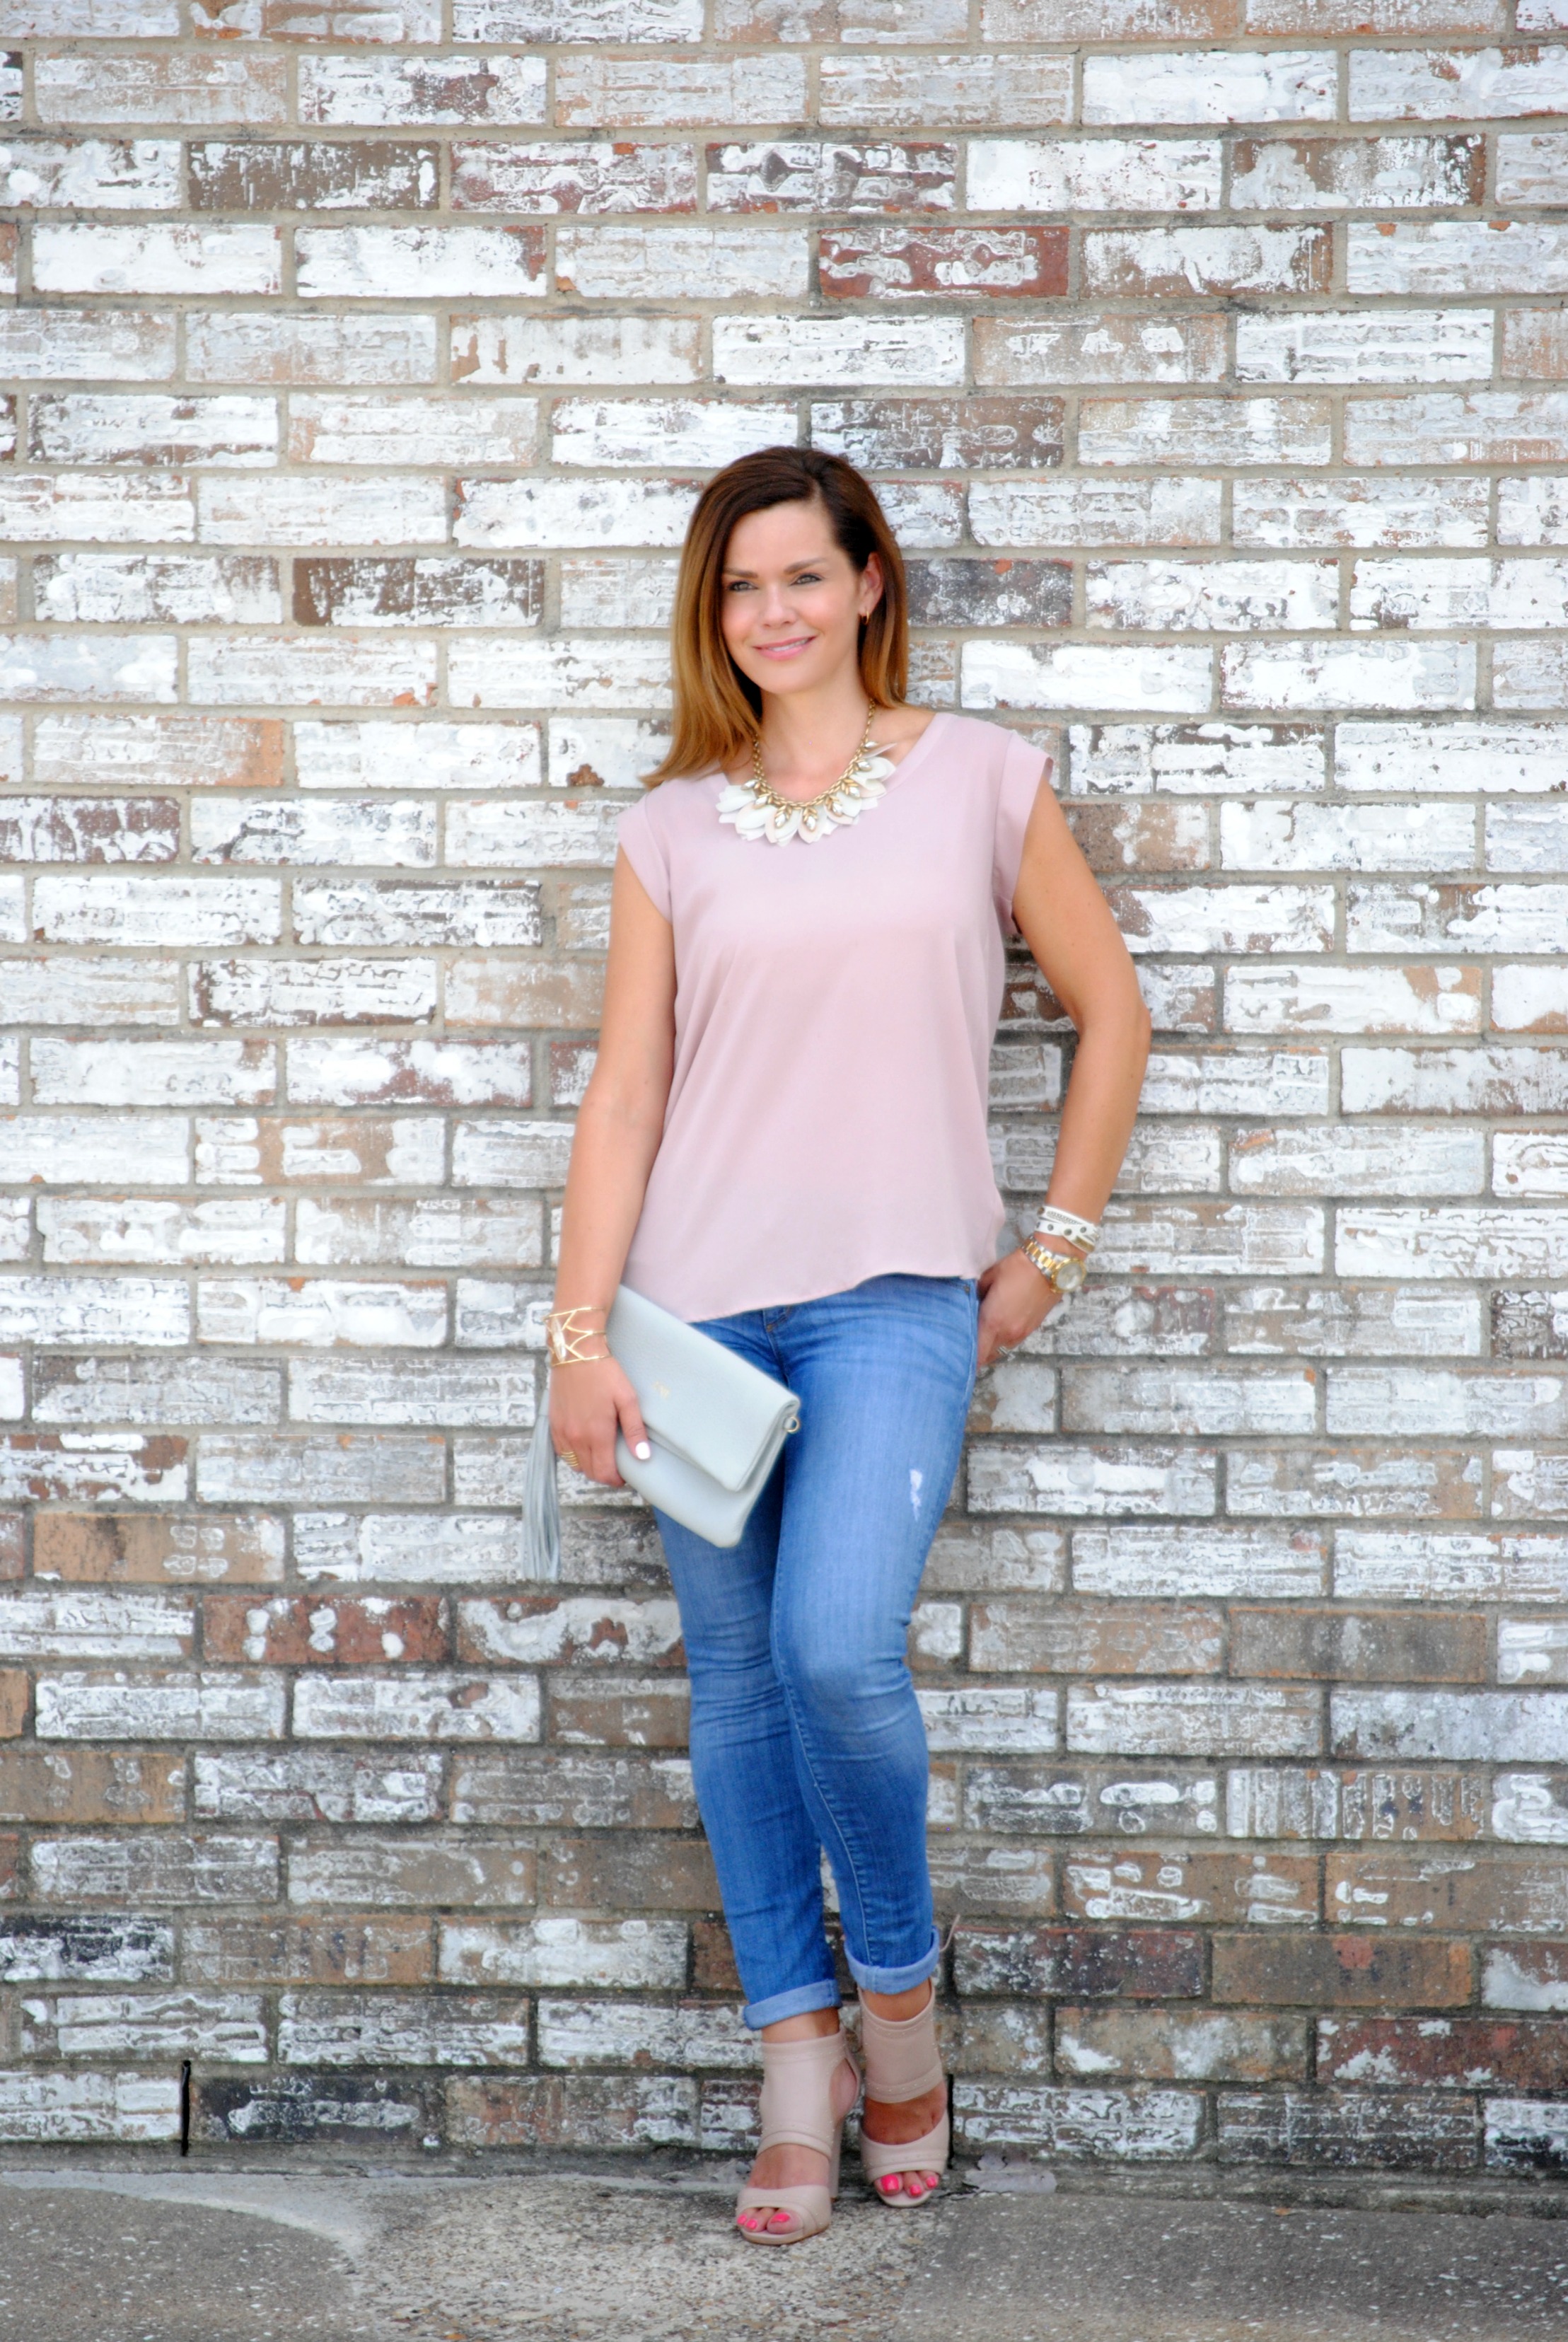 blush top outfit